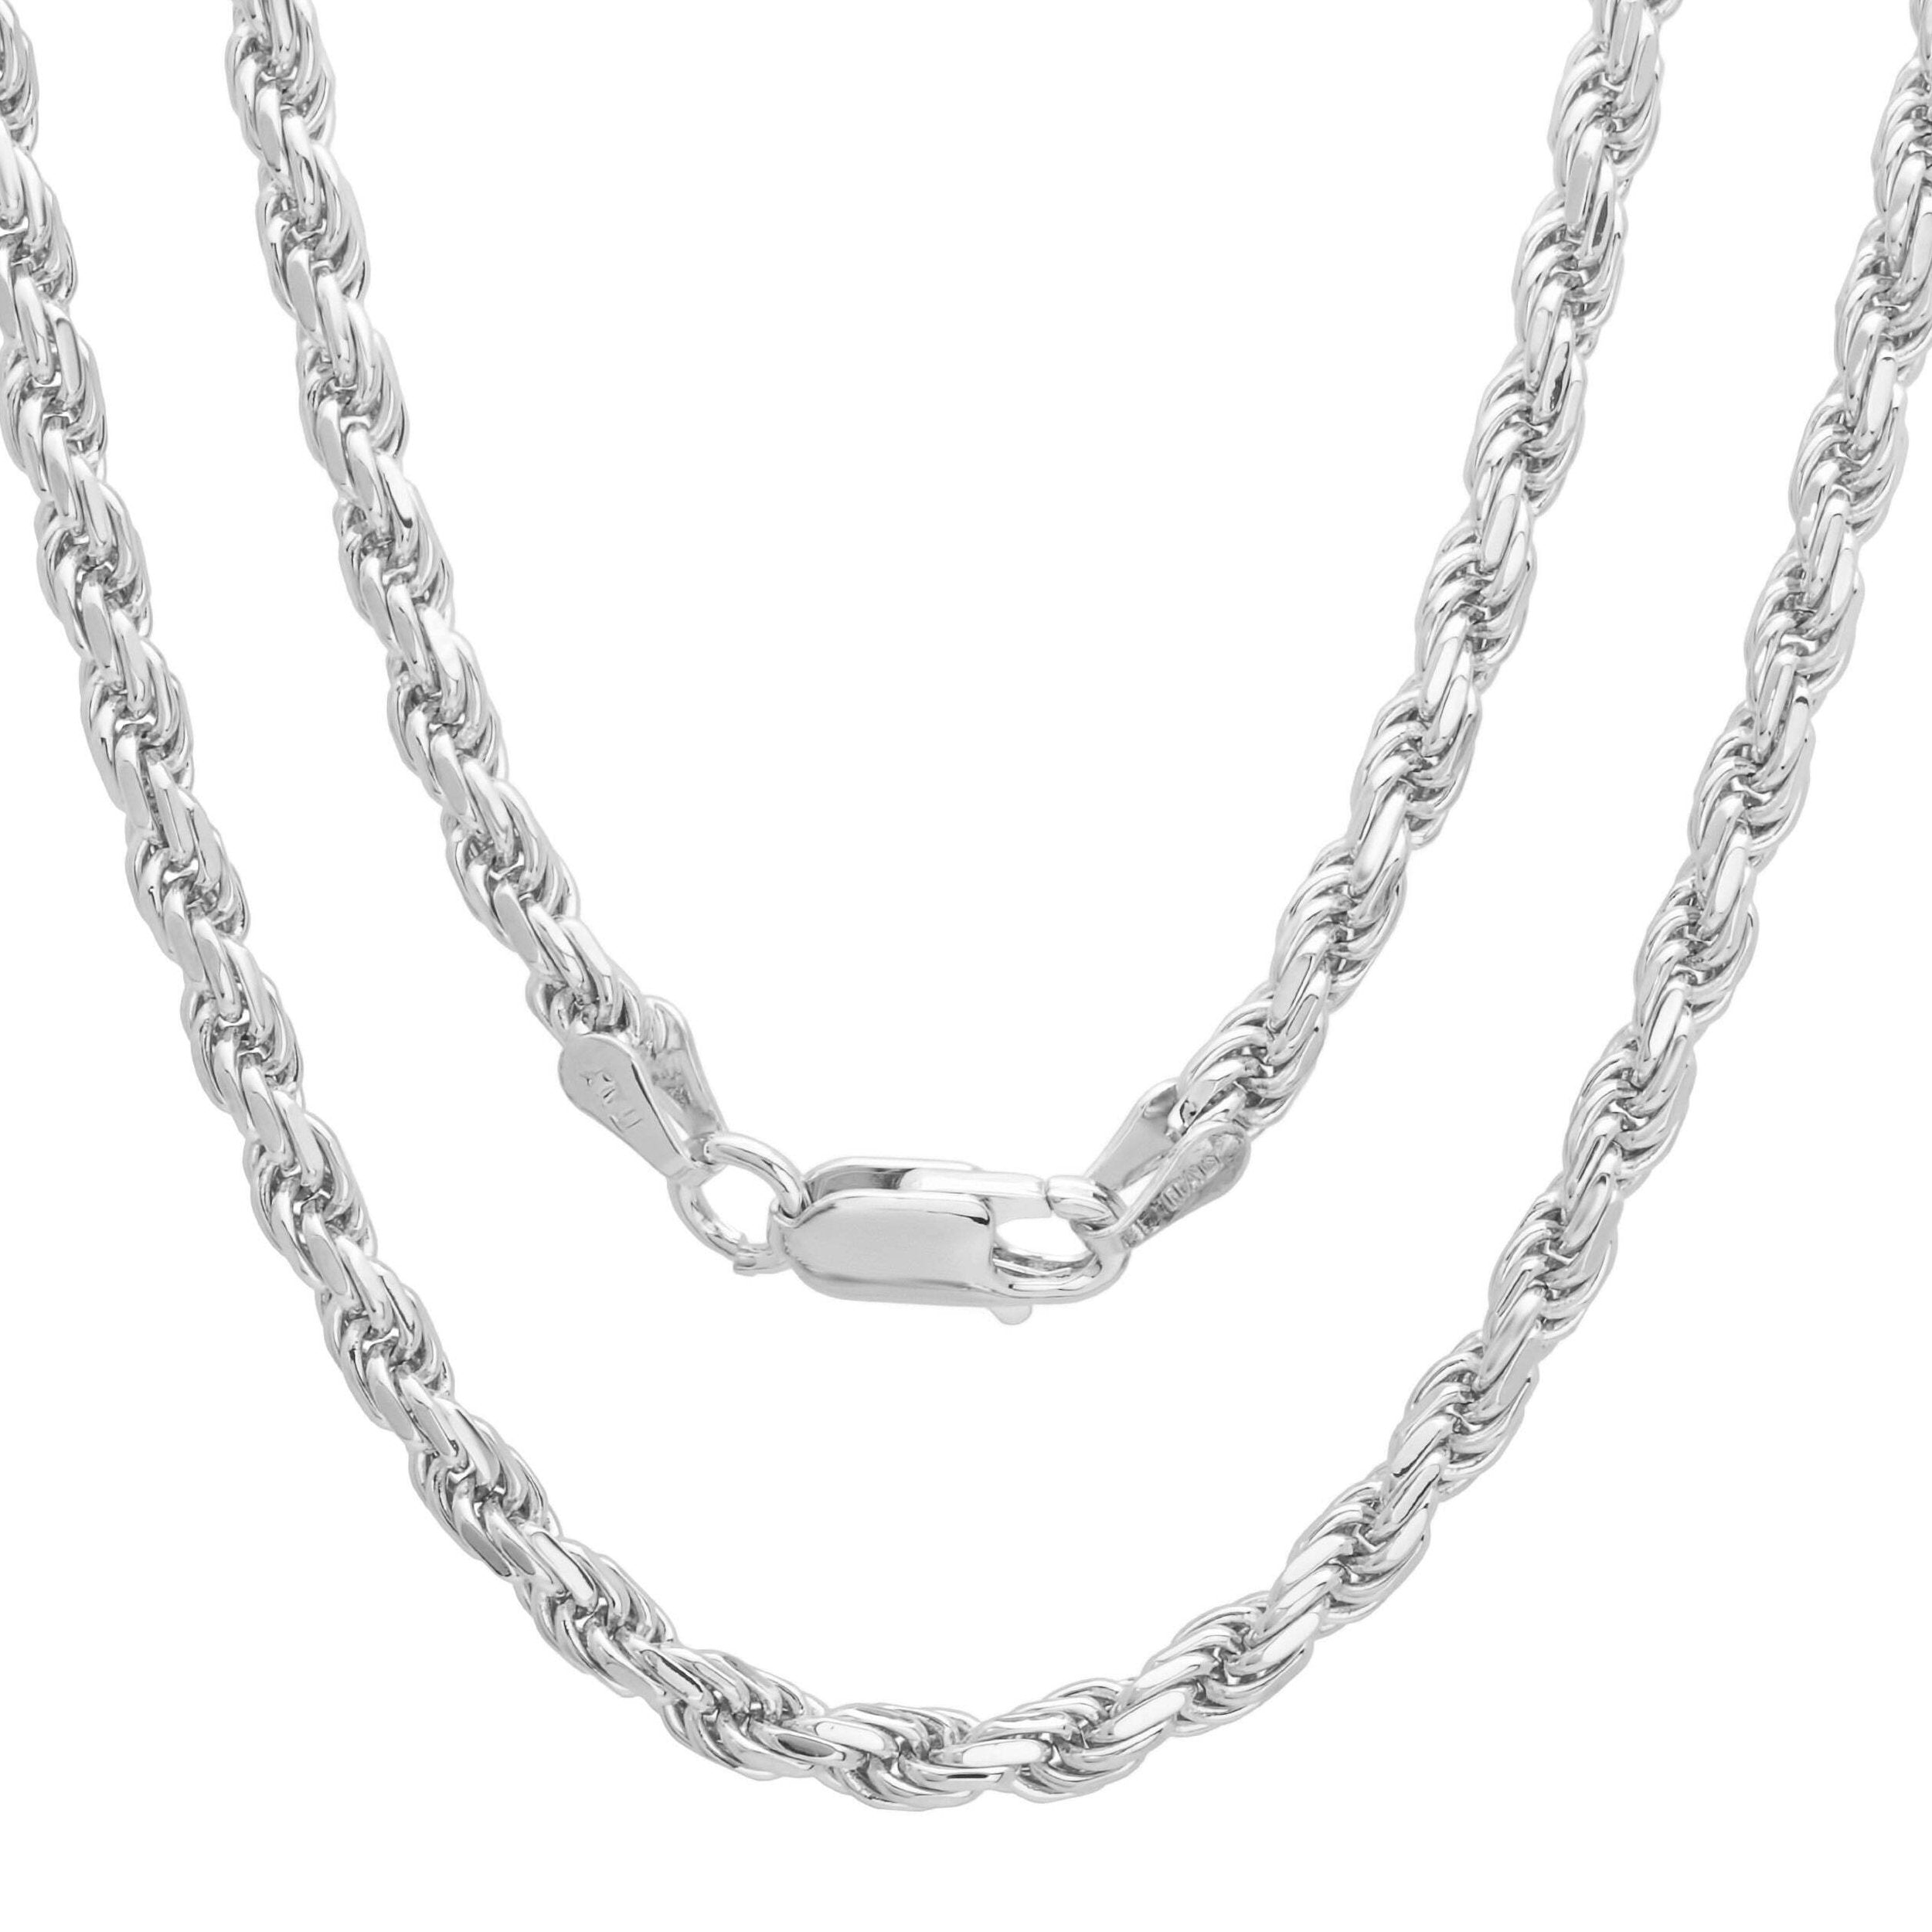 5MM 100 Rhodium Plated Rope Chain .925 Sterling Silver Length "8-28" Inches